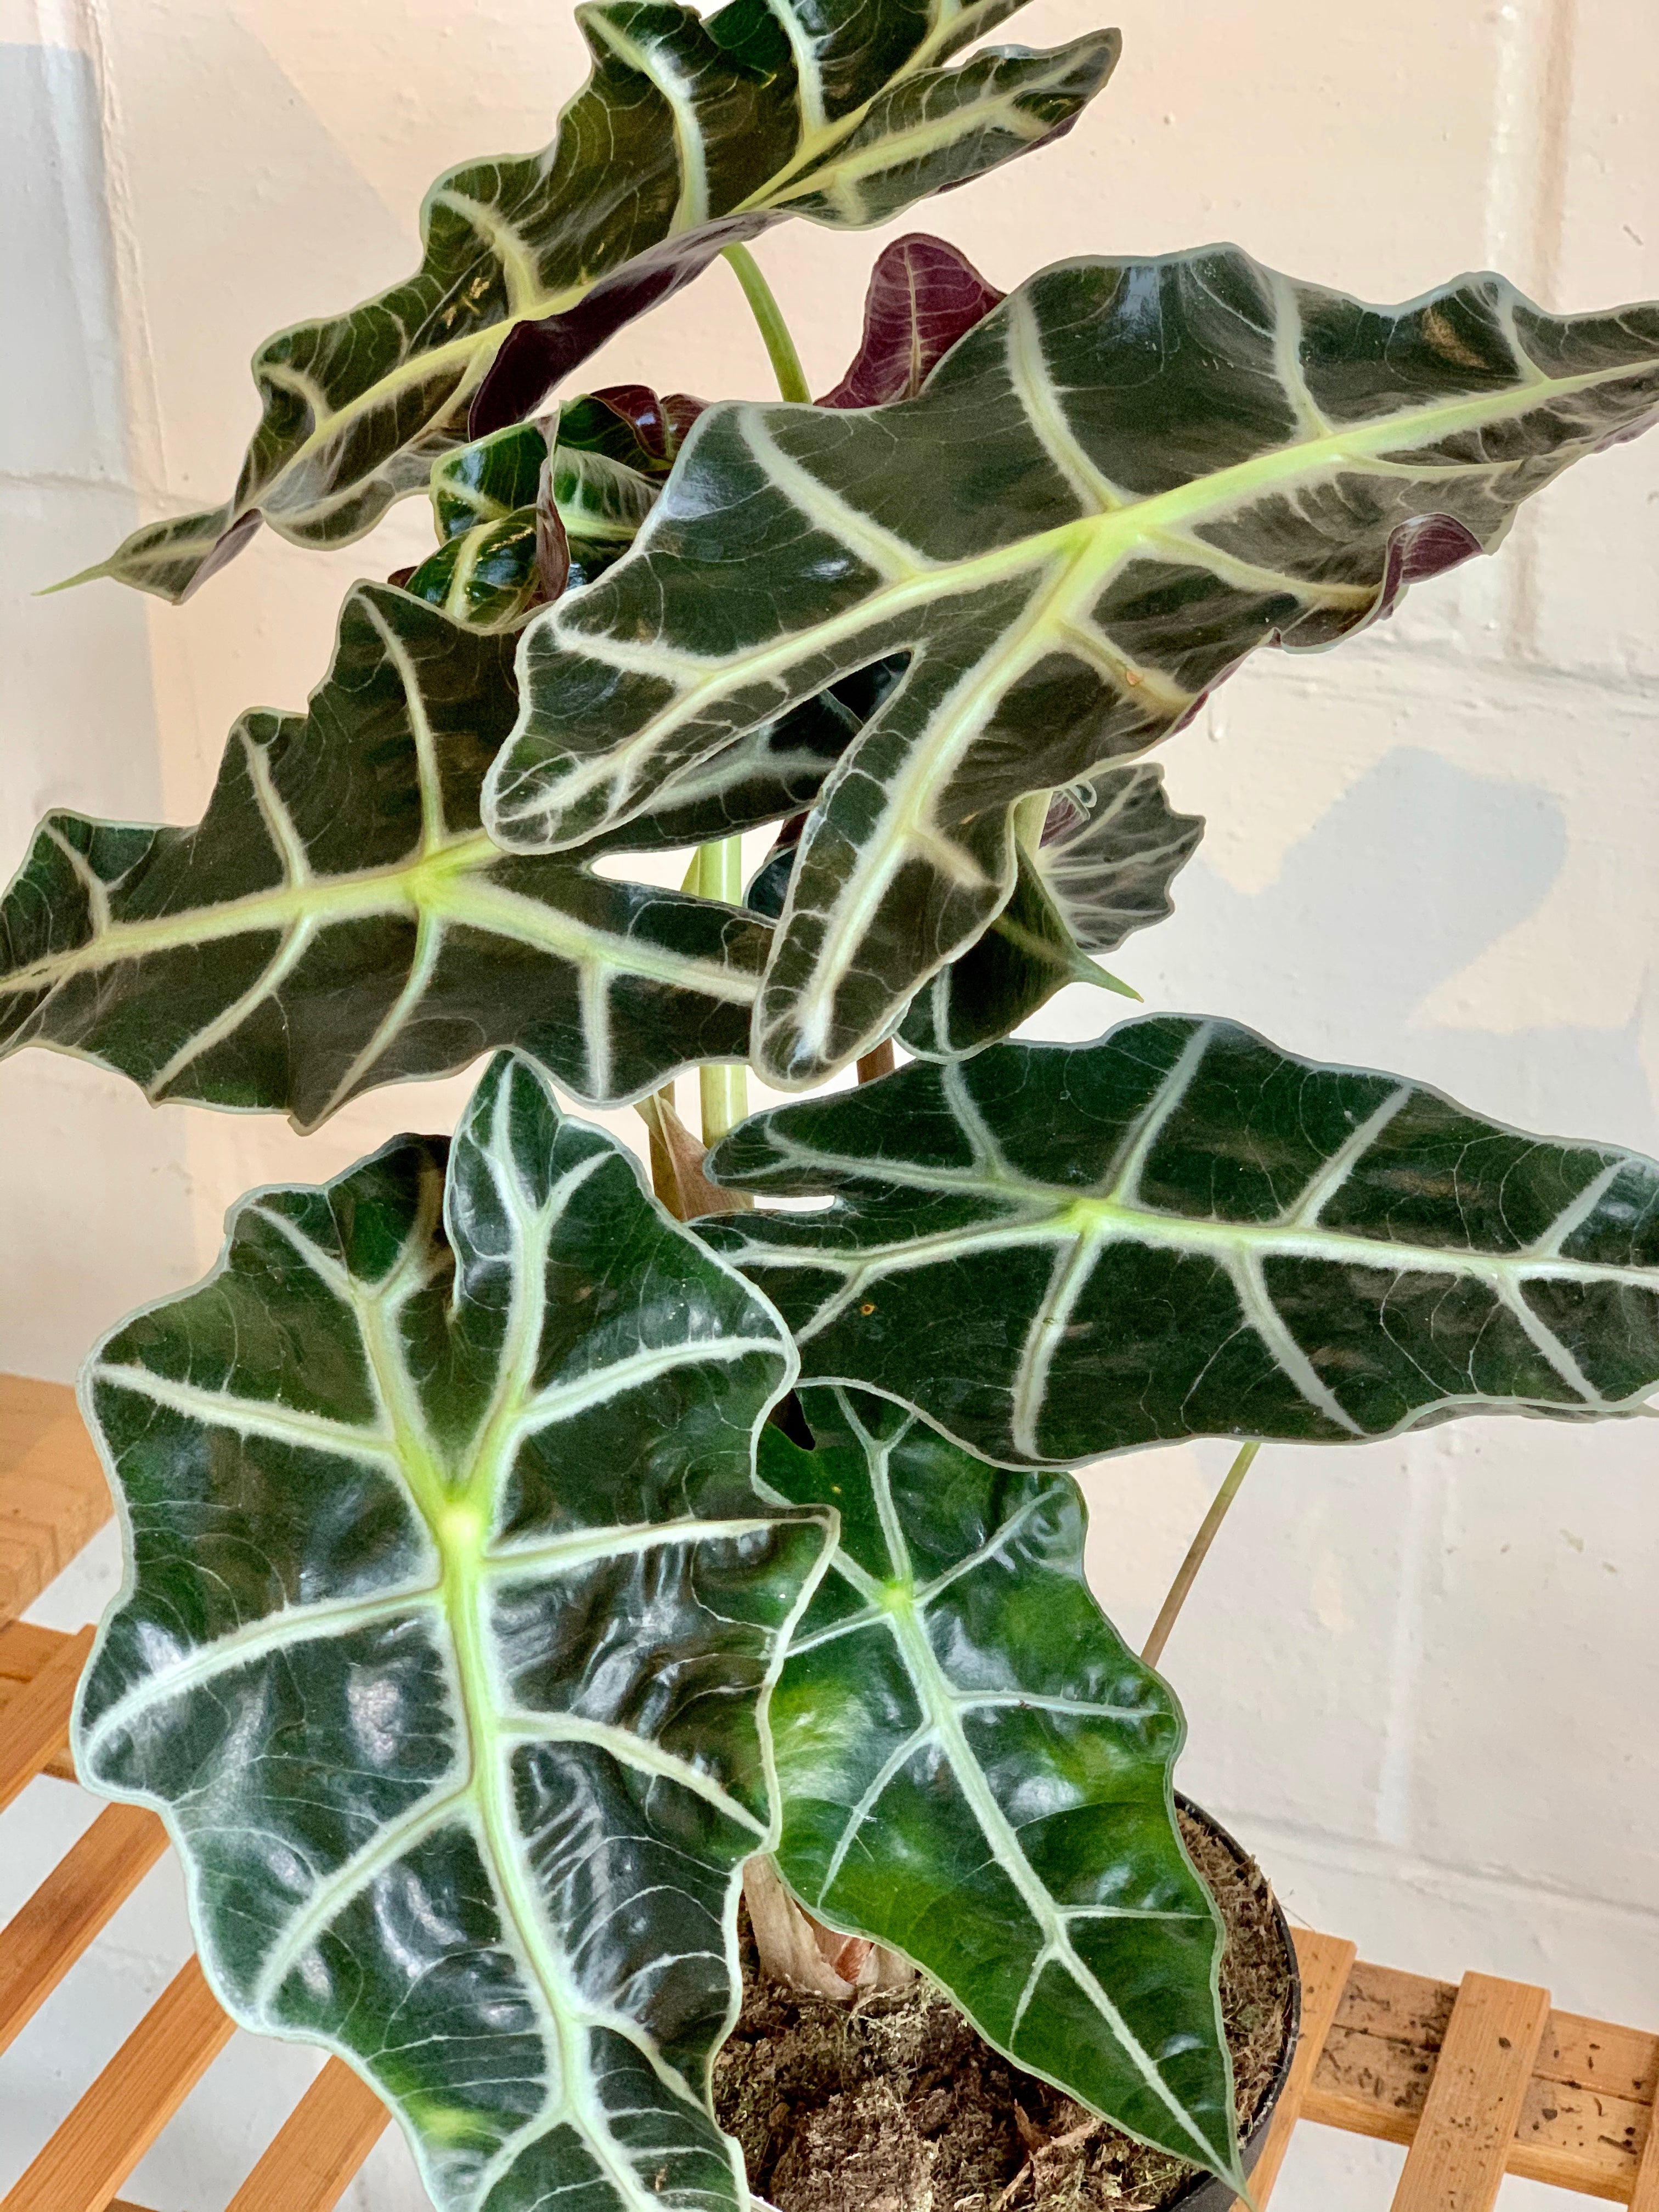 Alocasia - African Mask